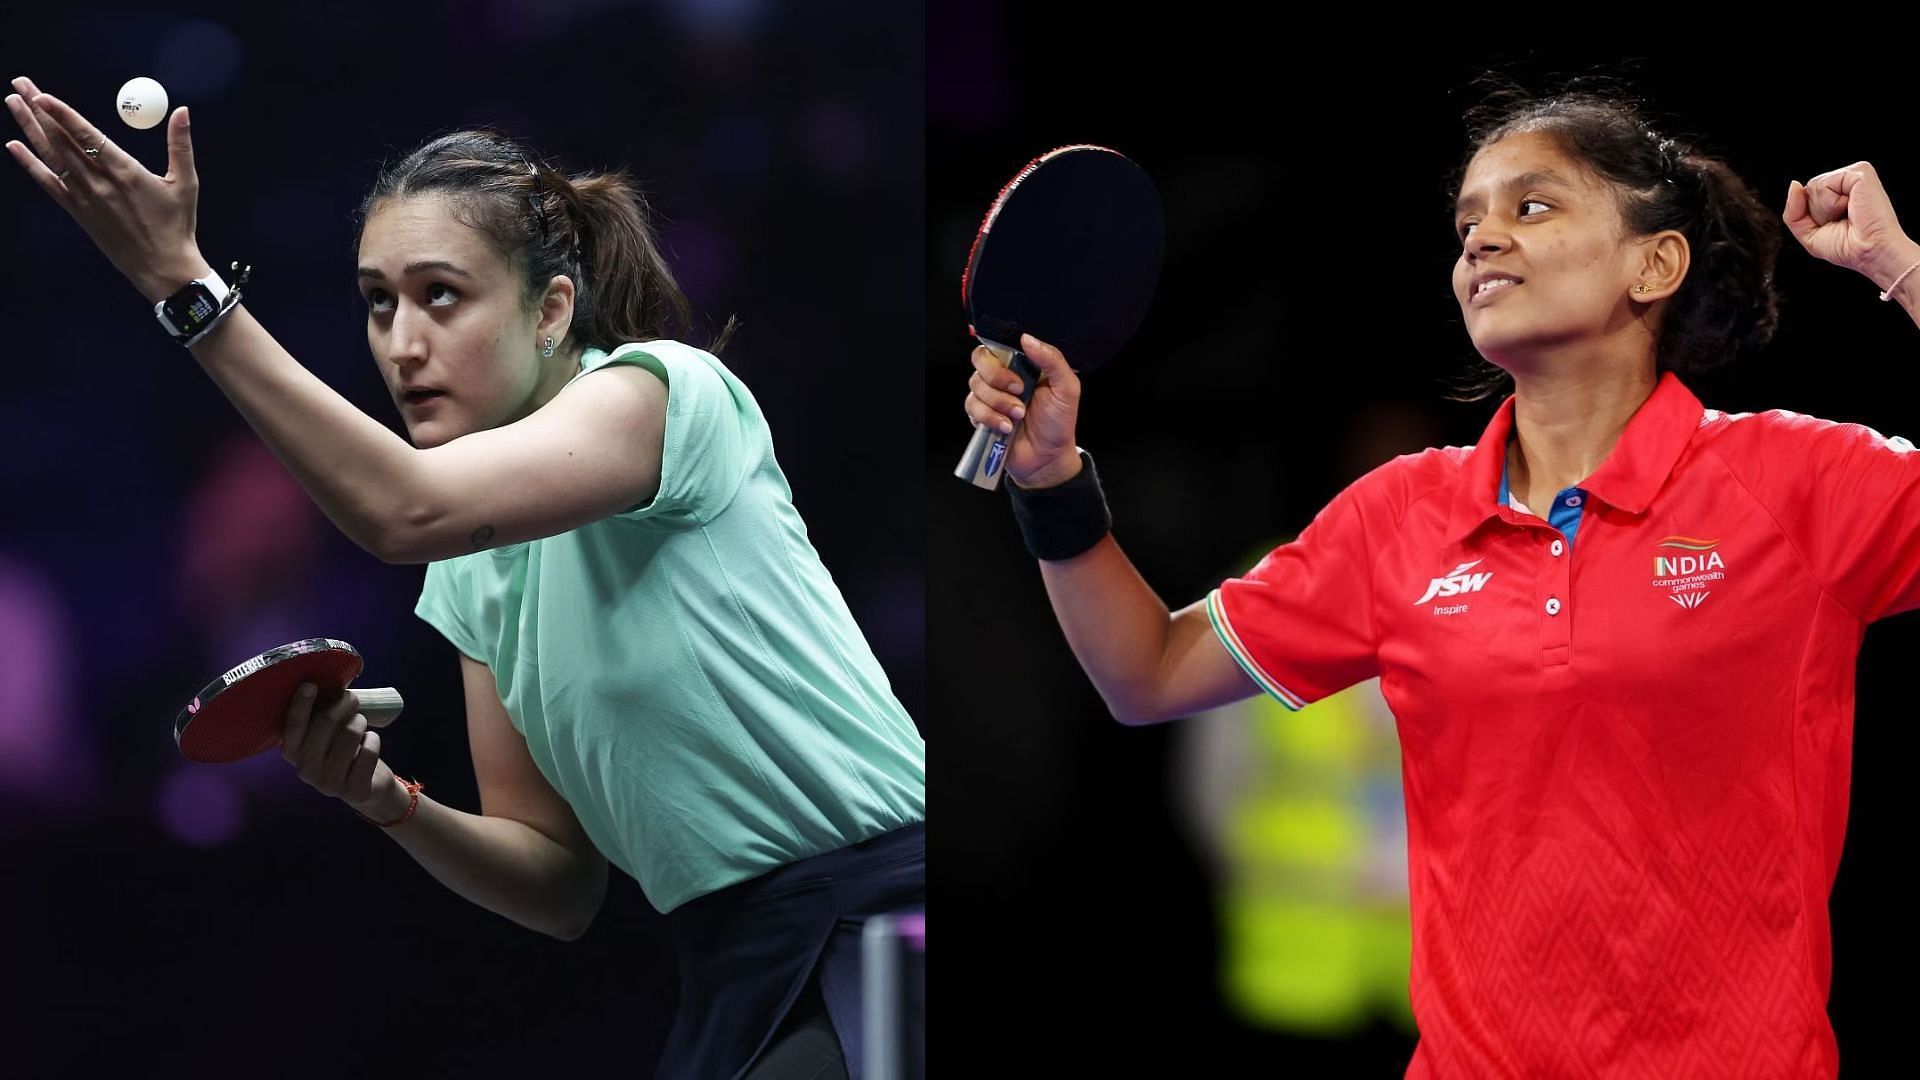 ITTF Singles World Cup Macao: Manika Batra and Sreeja Akula placed in tough groups (Image Credit: Getty)